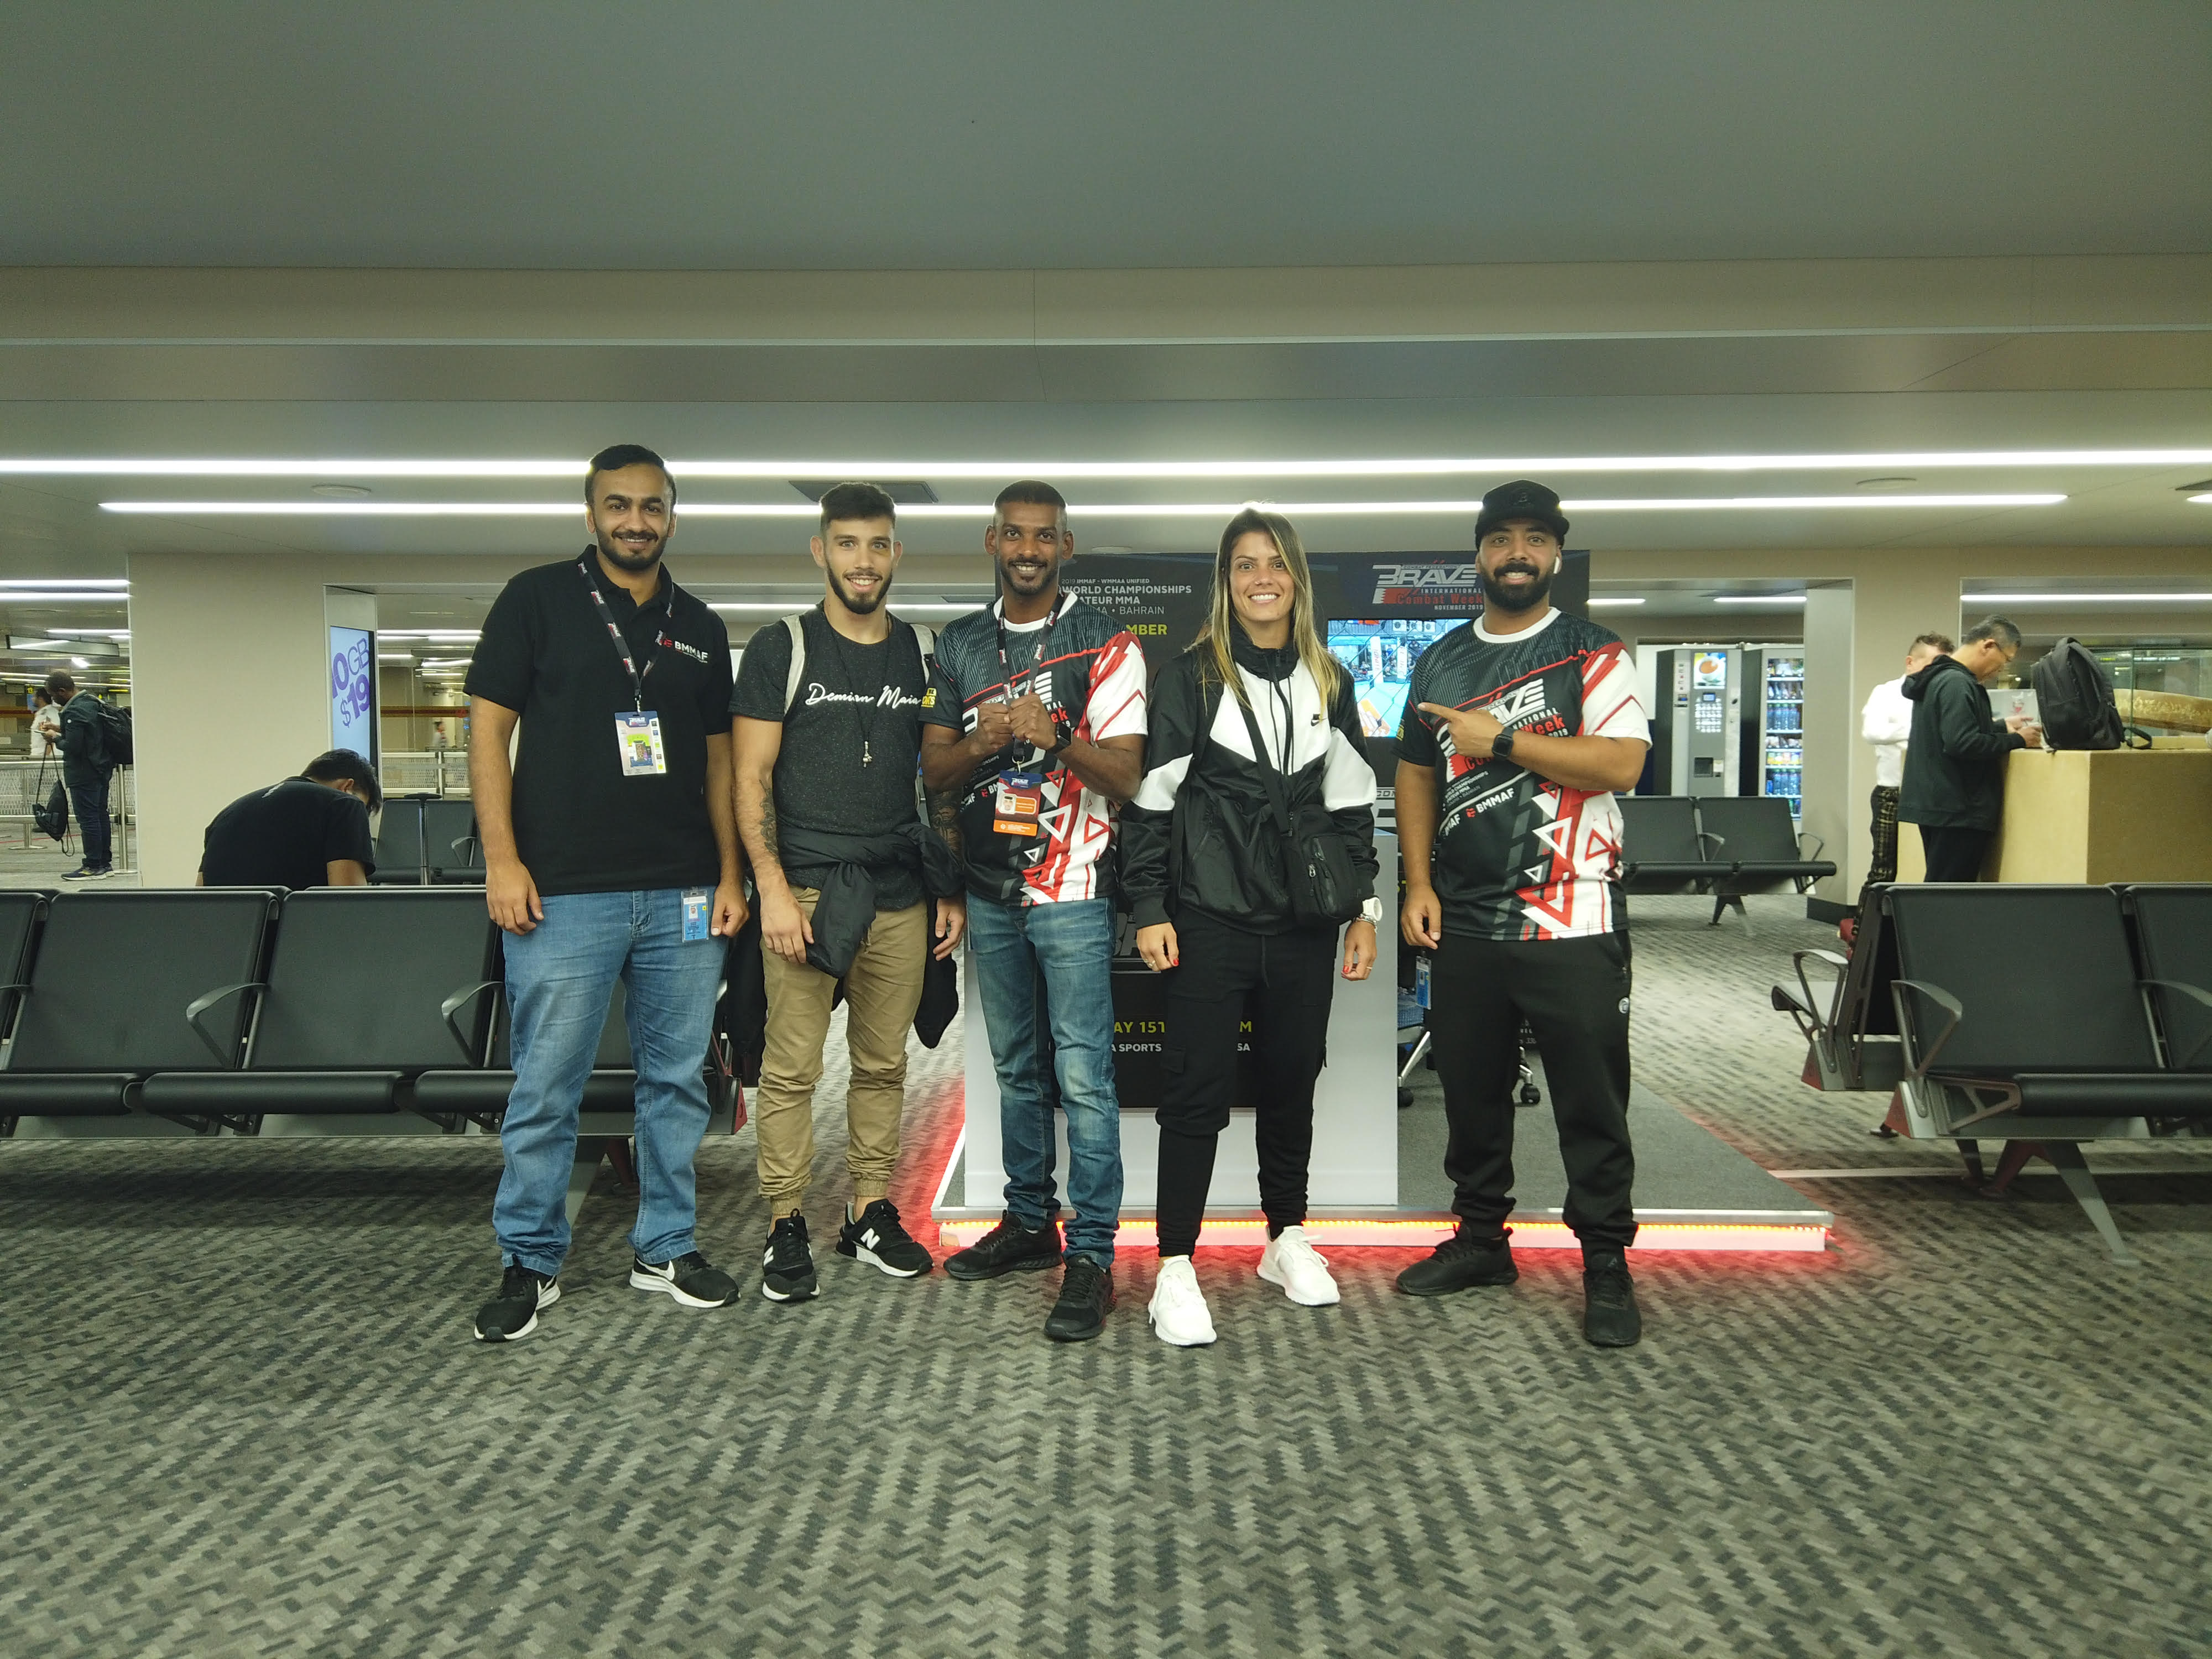 “Brazilian army” touches down in Bahrain ahead of BRAVE CF 29 - BraveCF